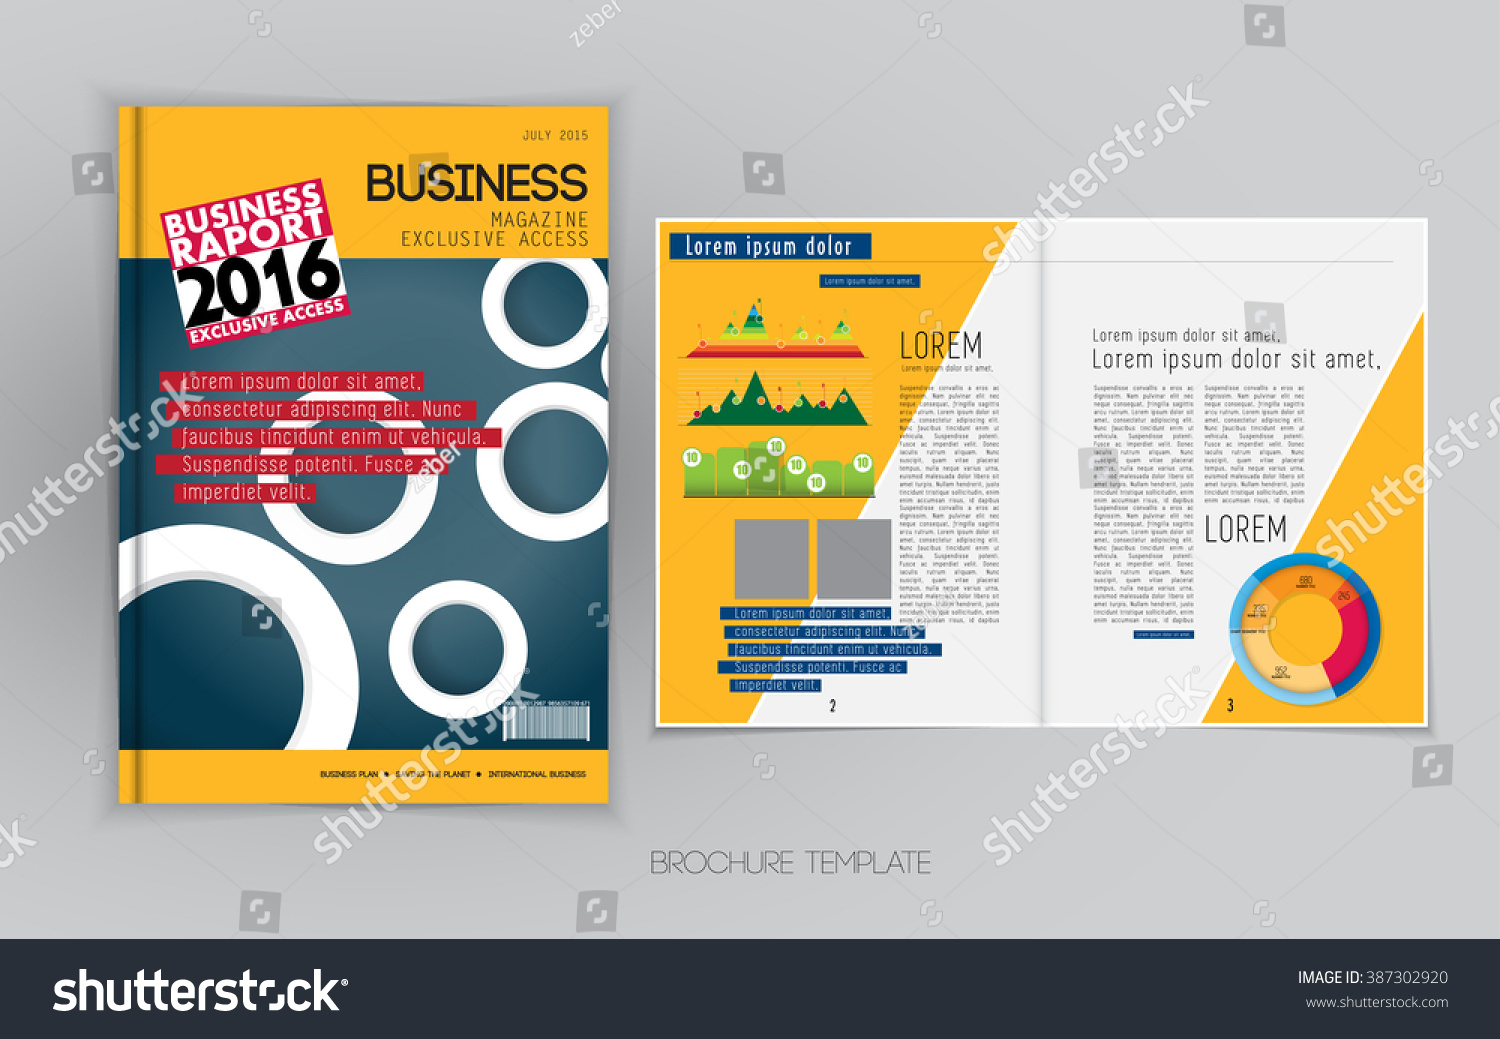 Business Broschure Layout Vector Stock Vector Royalty Free